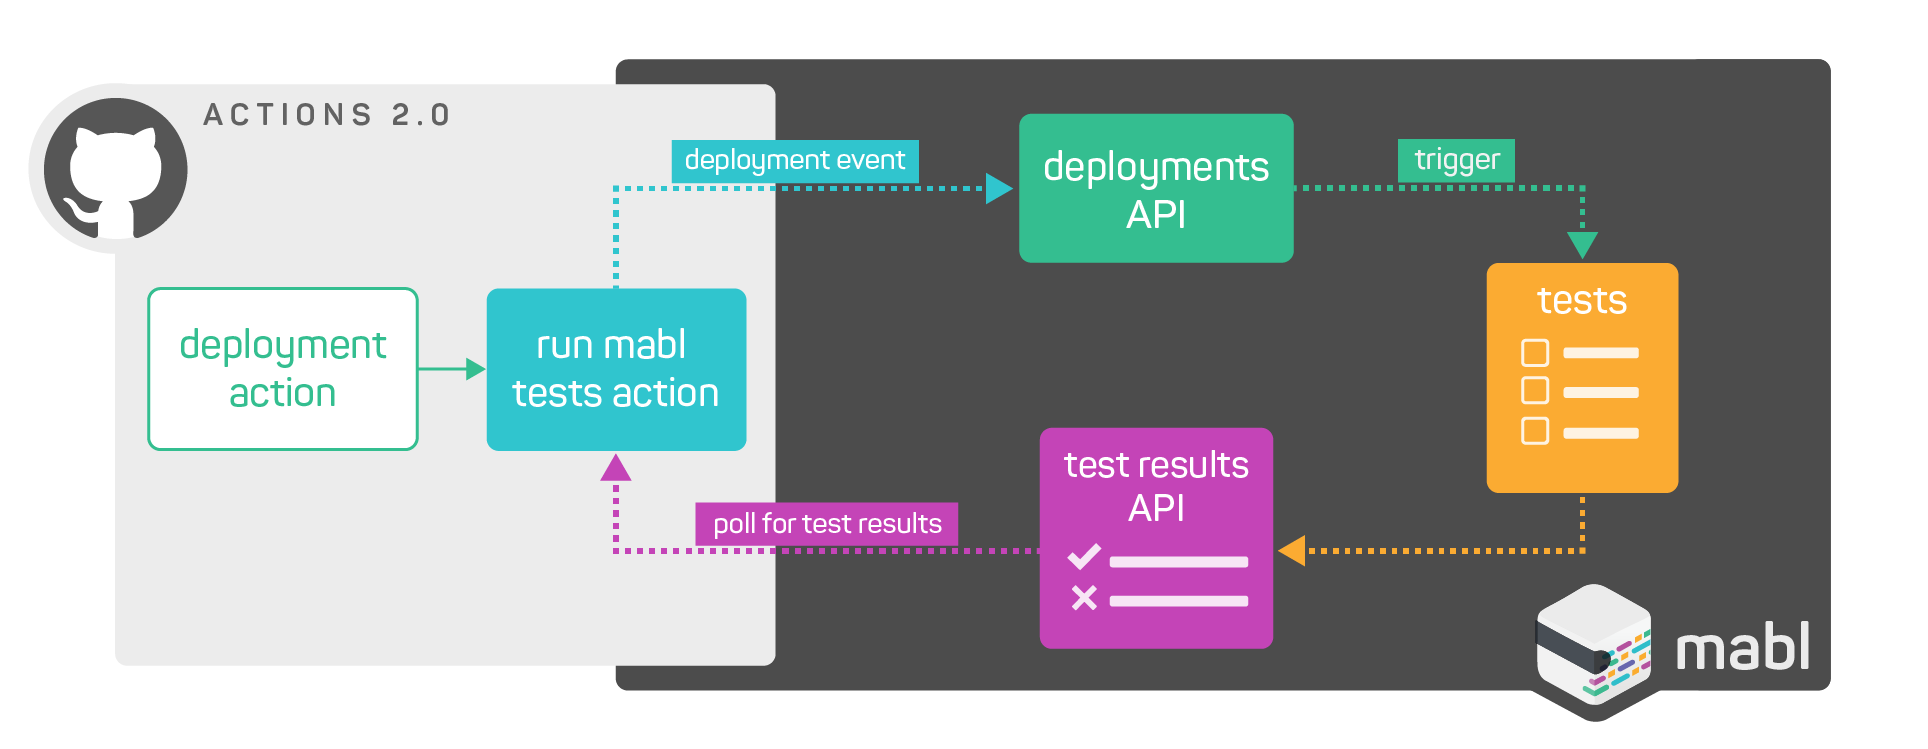 A screenshot showing that when mabl receives a deployment event, it automatically triggers the relevant tests.